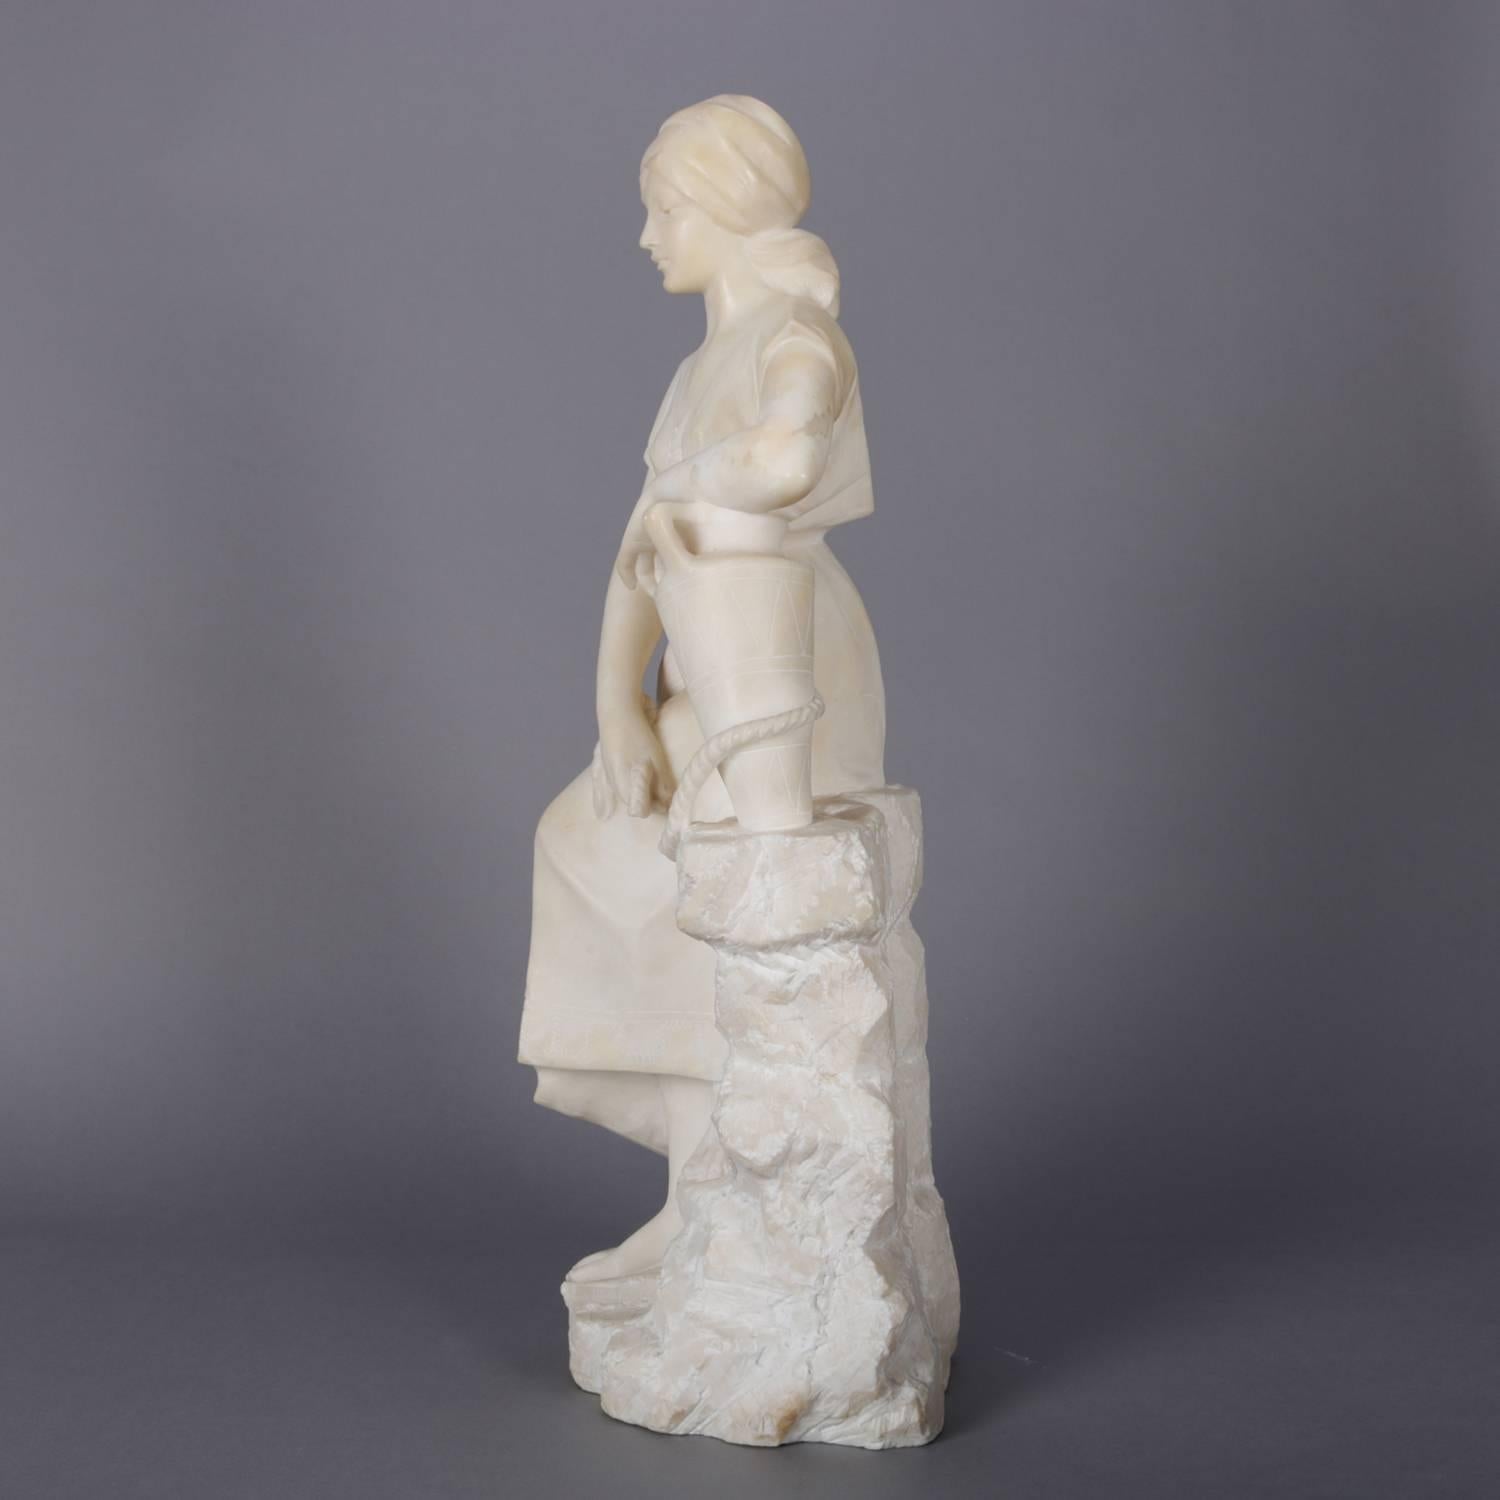 19th Century Antique Italian Carved Alabaster Sculpture of Woman at the Well, Signed